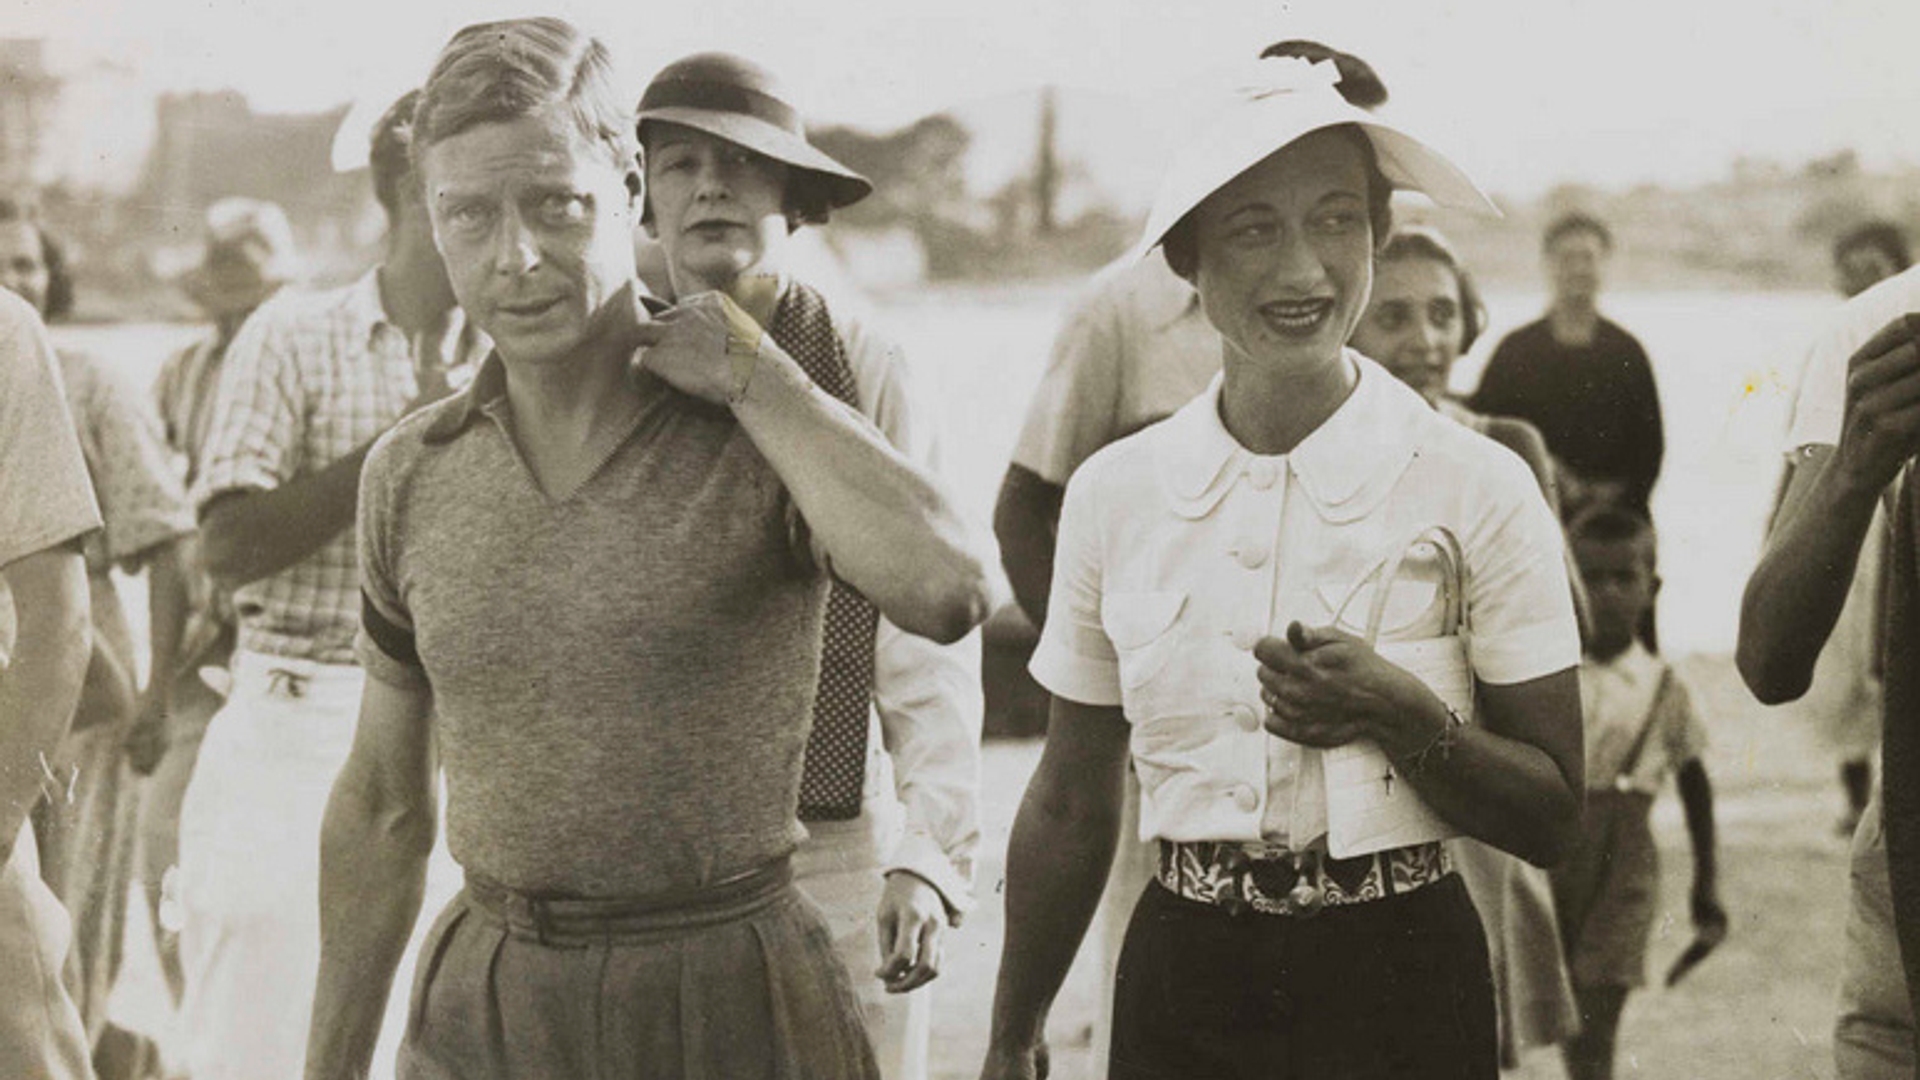 king-edward-viii-and-mrs-simpson-on-holiday-in-yugoslavia-1936